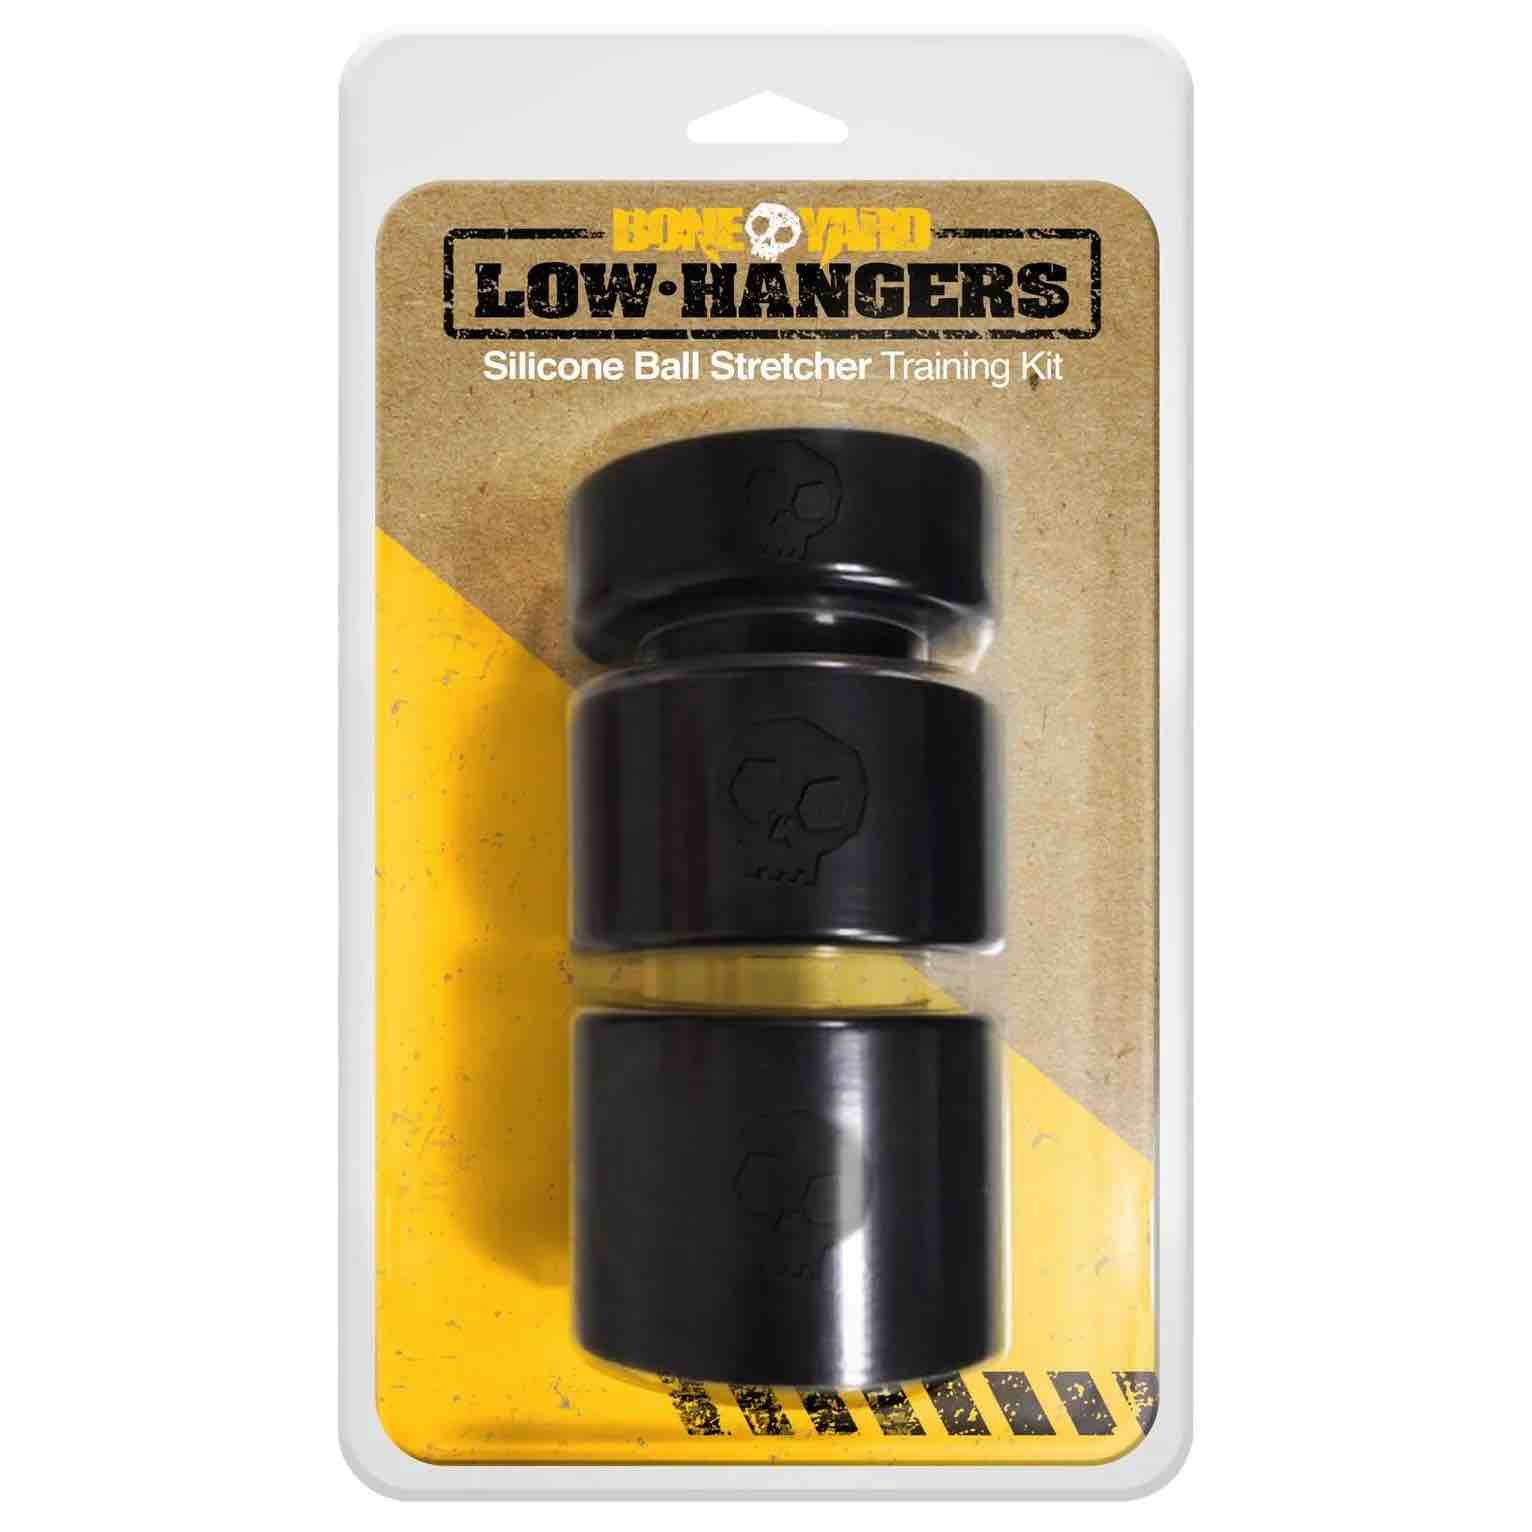 The Low Hangers Ball Stretcher Set in its packaging.